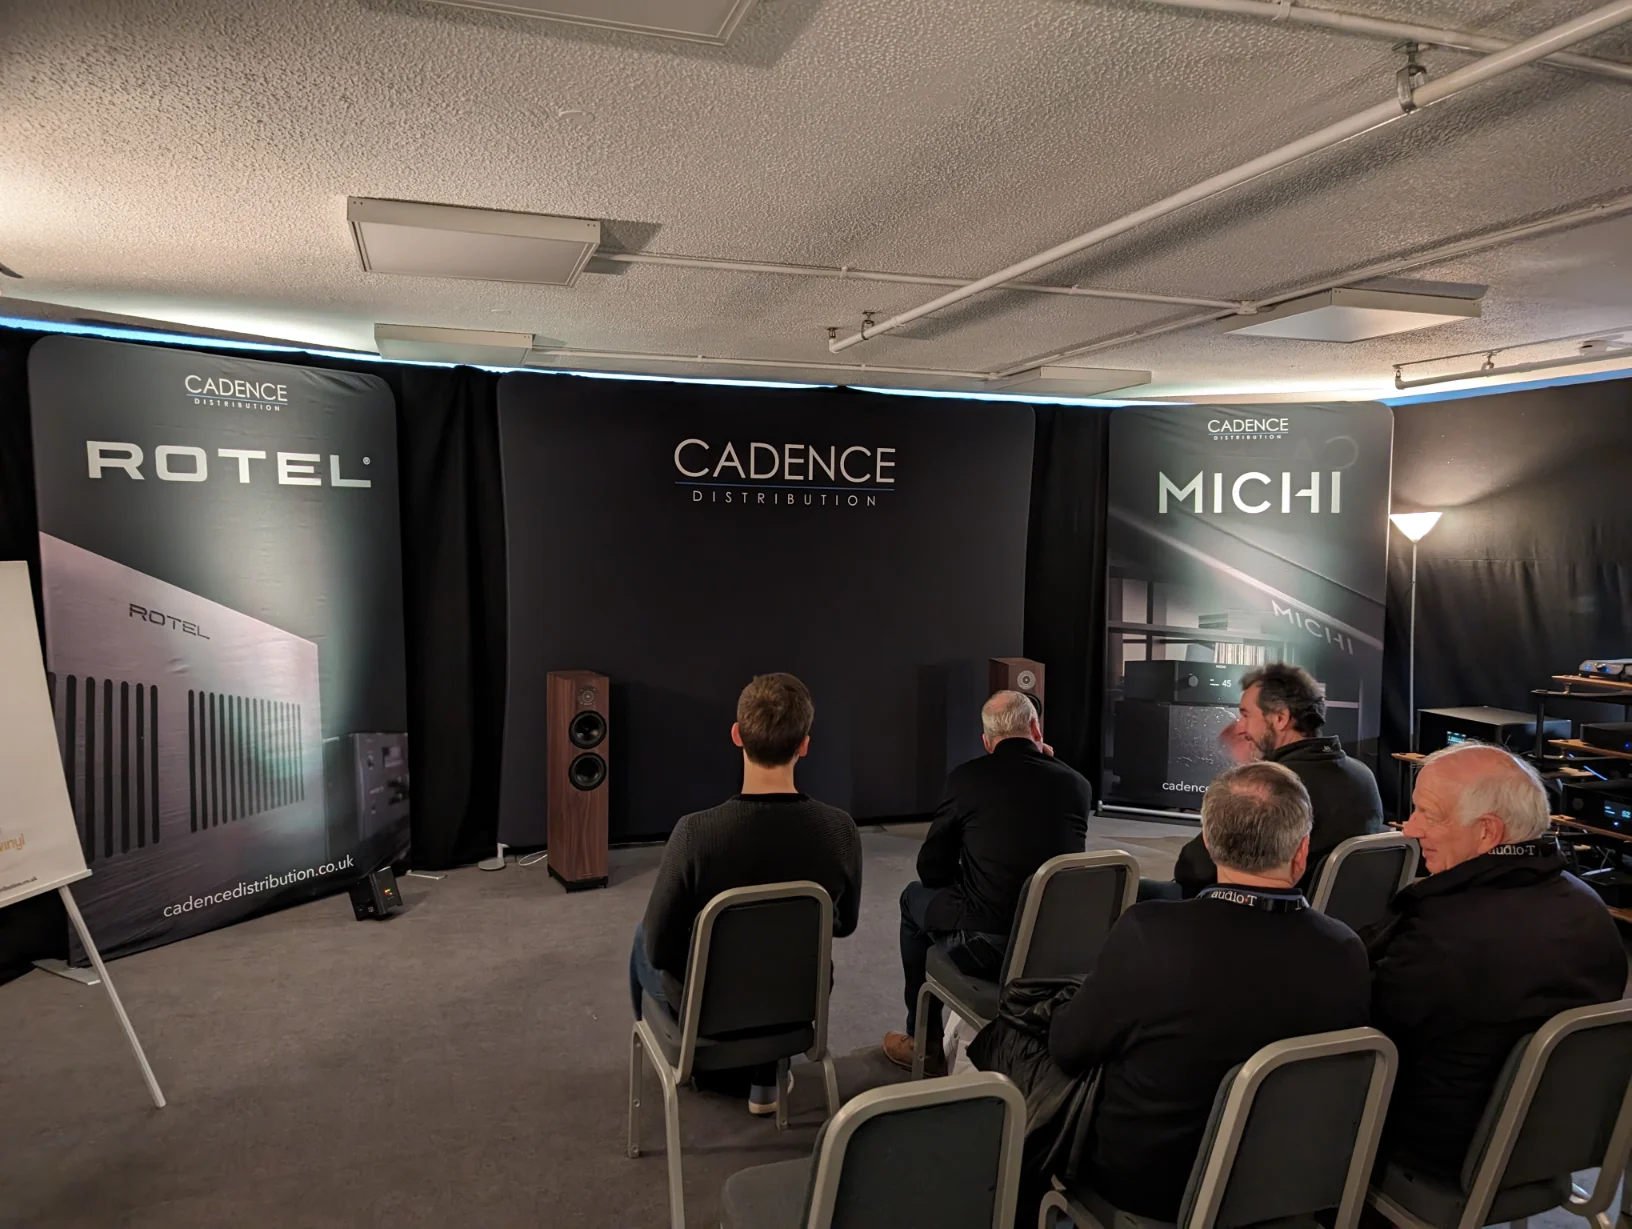 Cadence have “put the band back together”, with Paul Clewes and Ian Sutton now running the show just like they did for years with B&W. It was good to see the Spendor D7.2 at home in such a large room – sounded terrific!